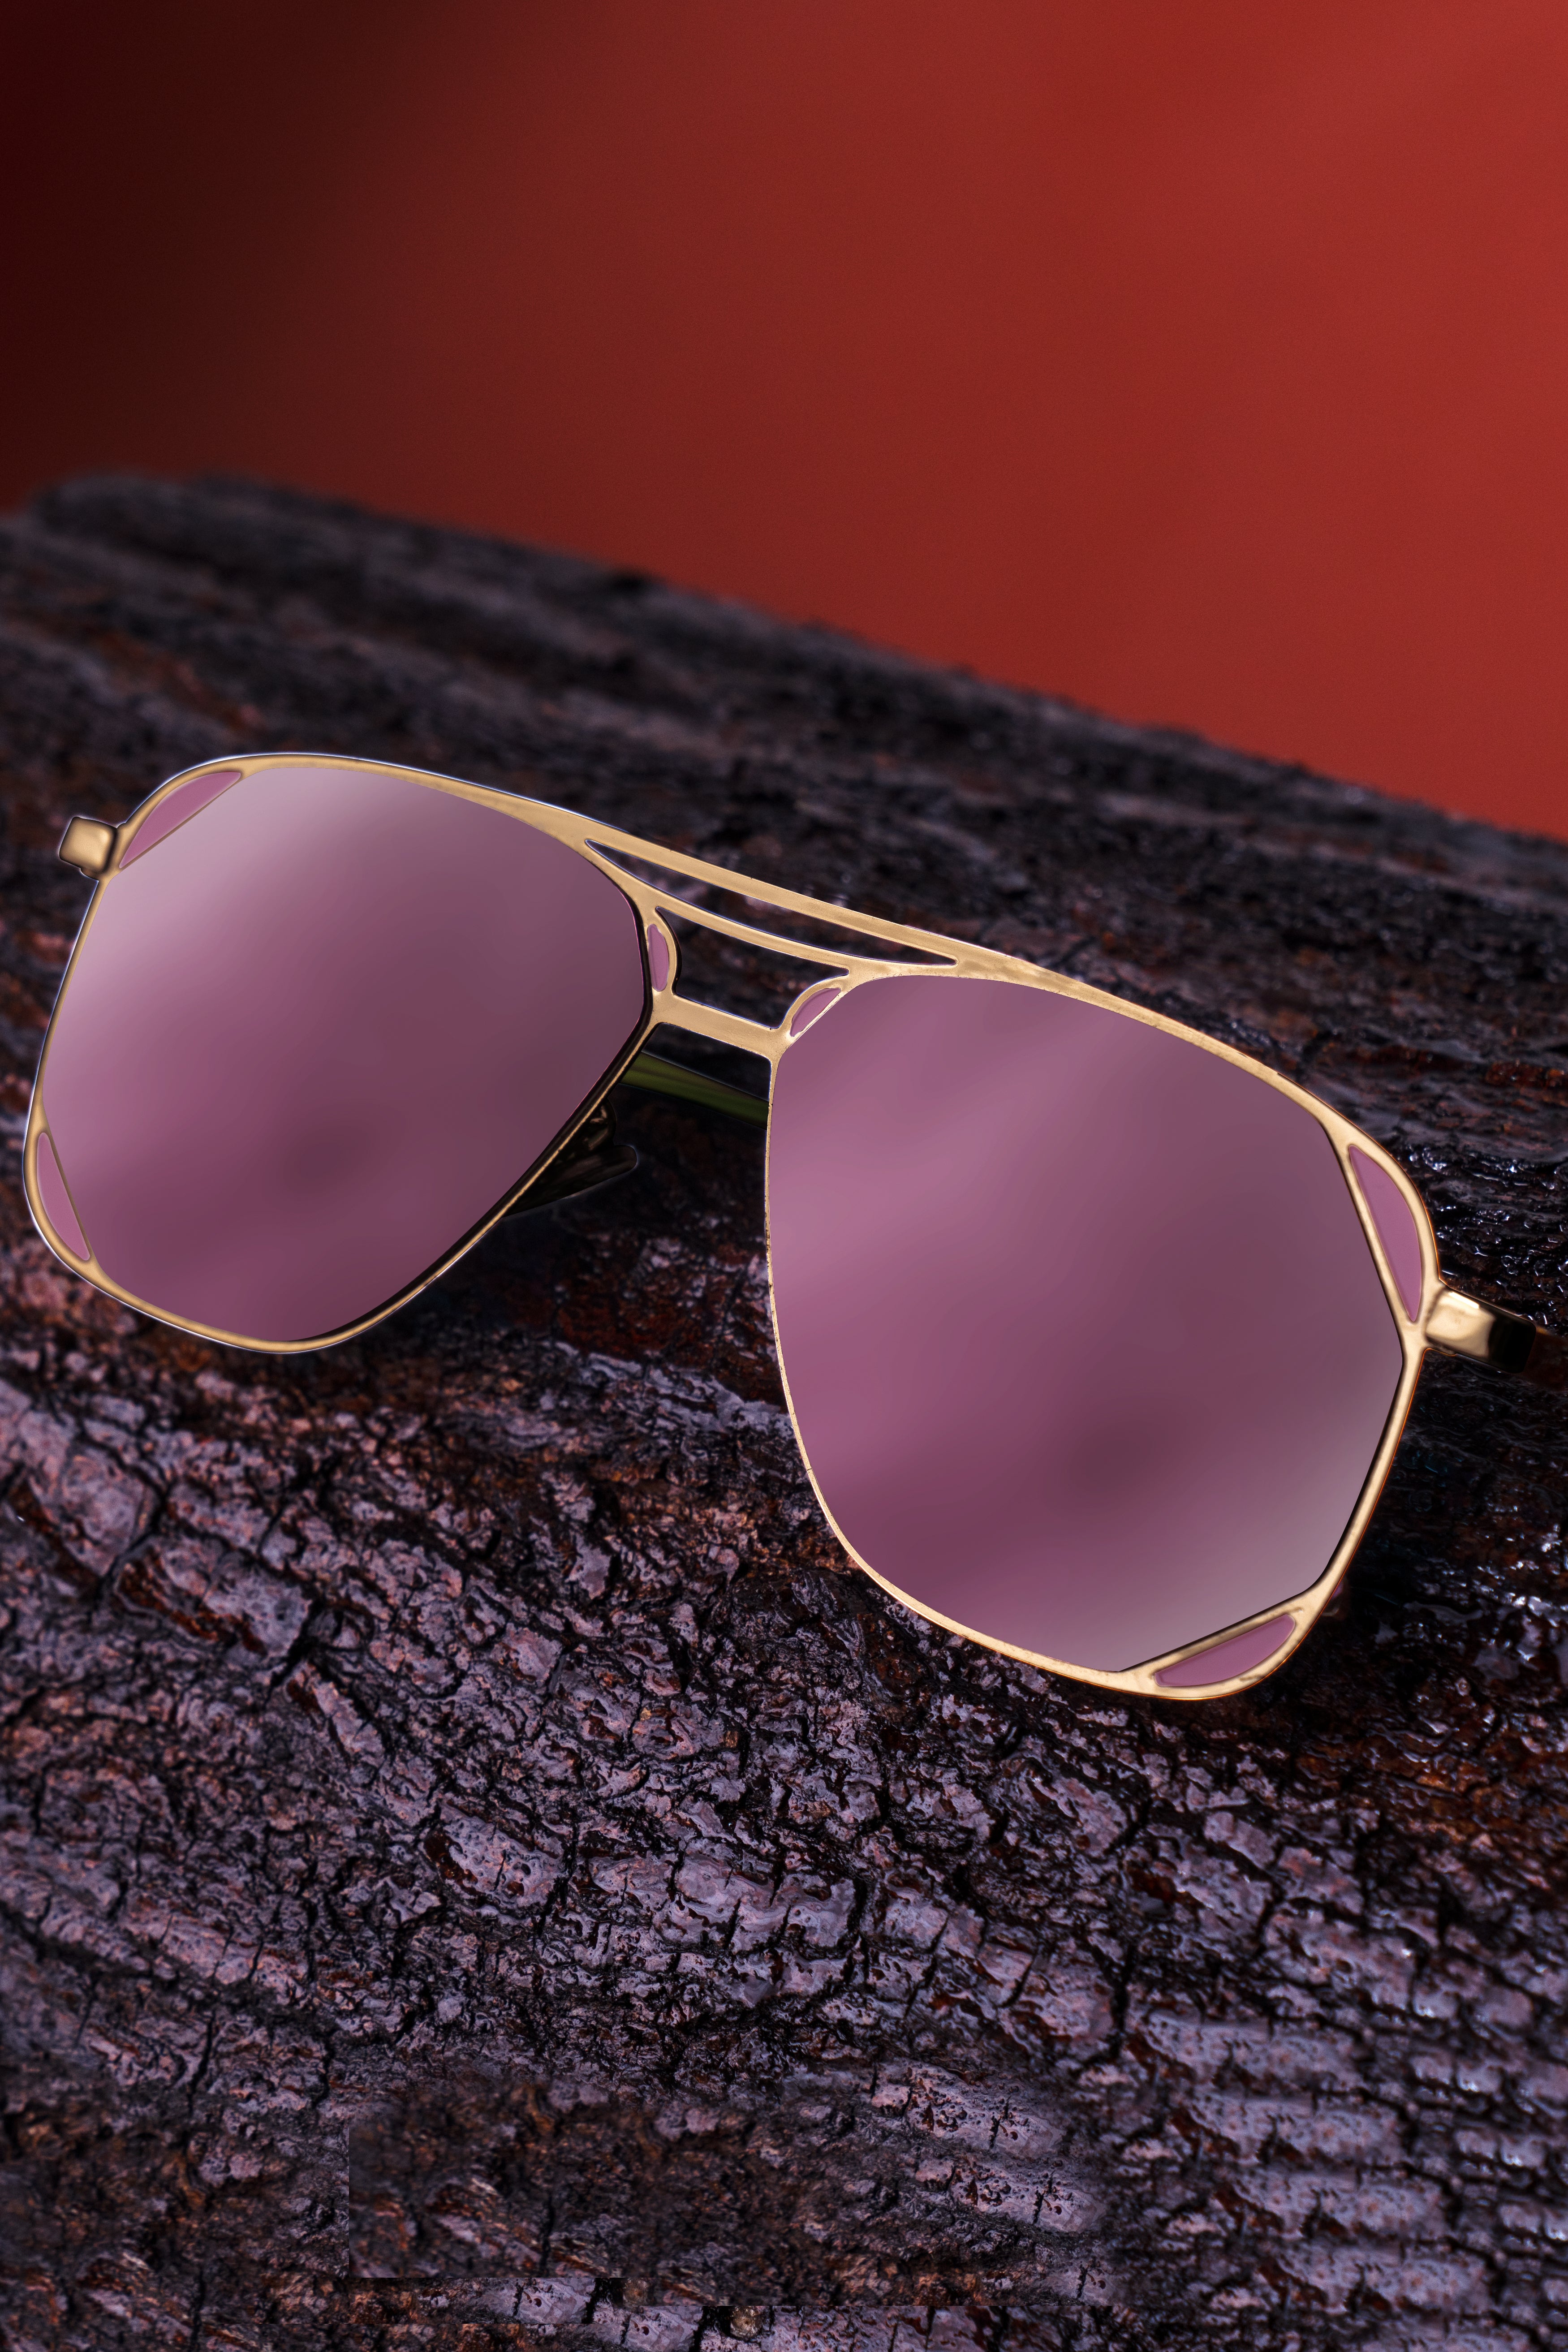 Rose Pink French Crown Aviator Unisex Sunglasses